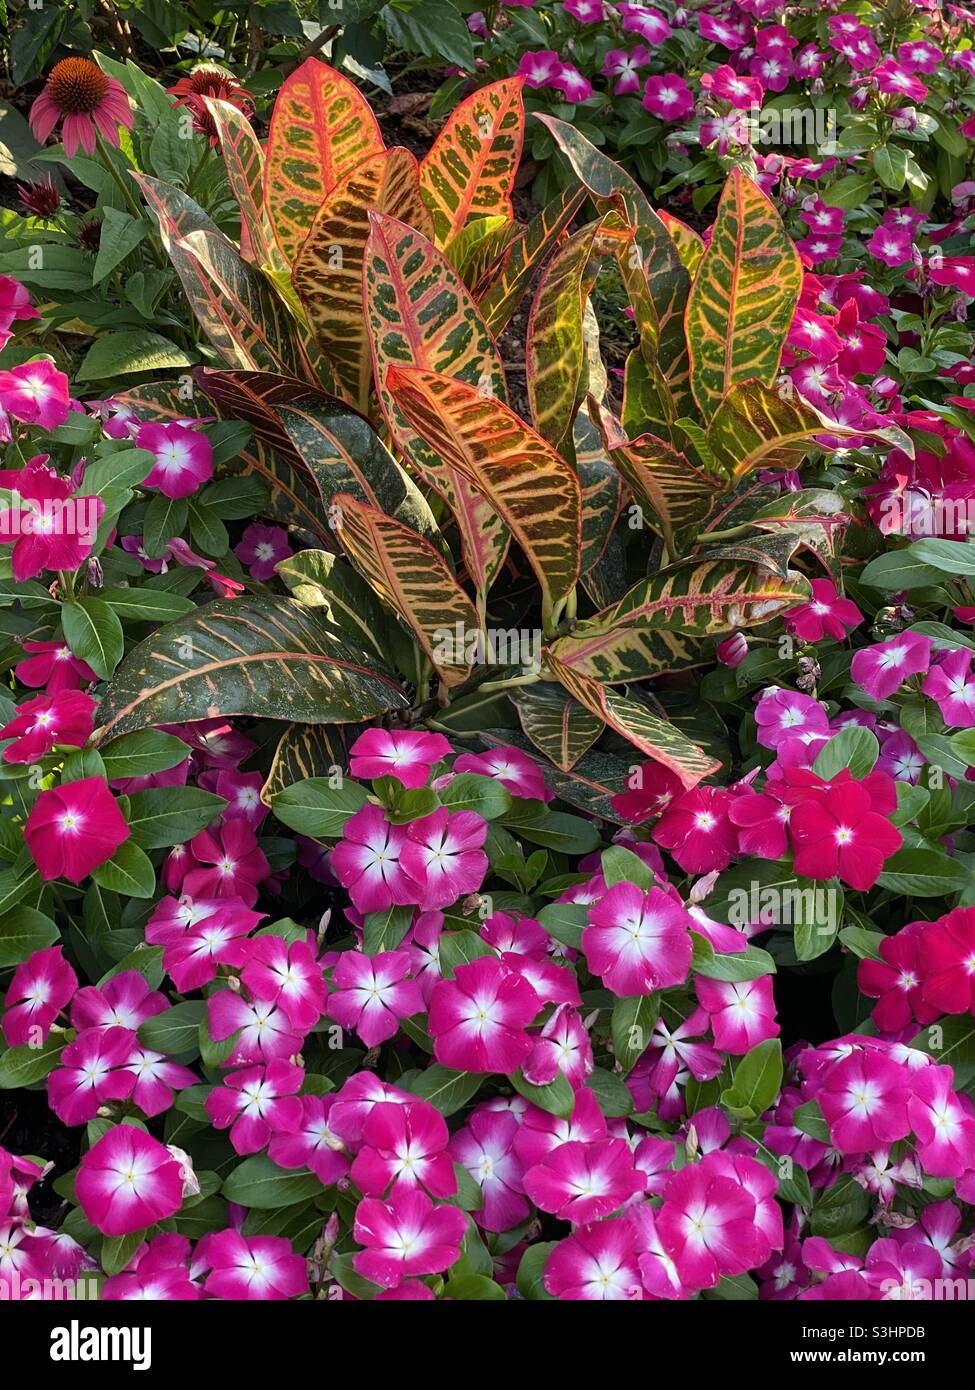 Variegated Croton plant with Madagascar Periwinkle flowers Stock Photo